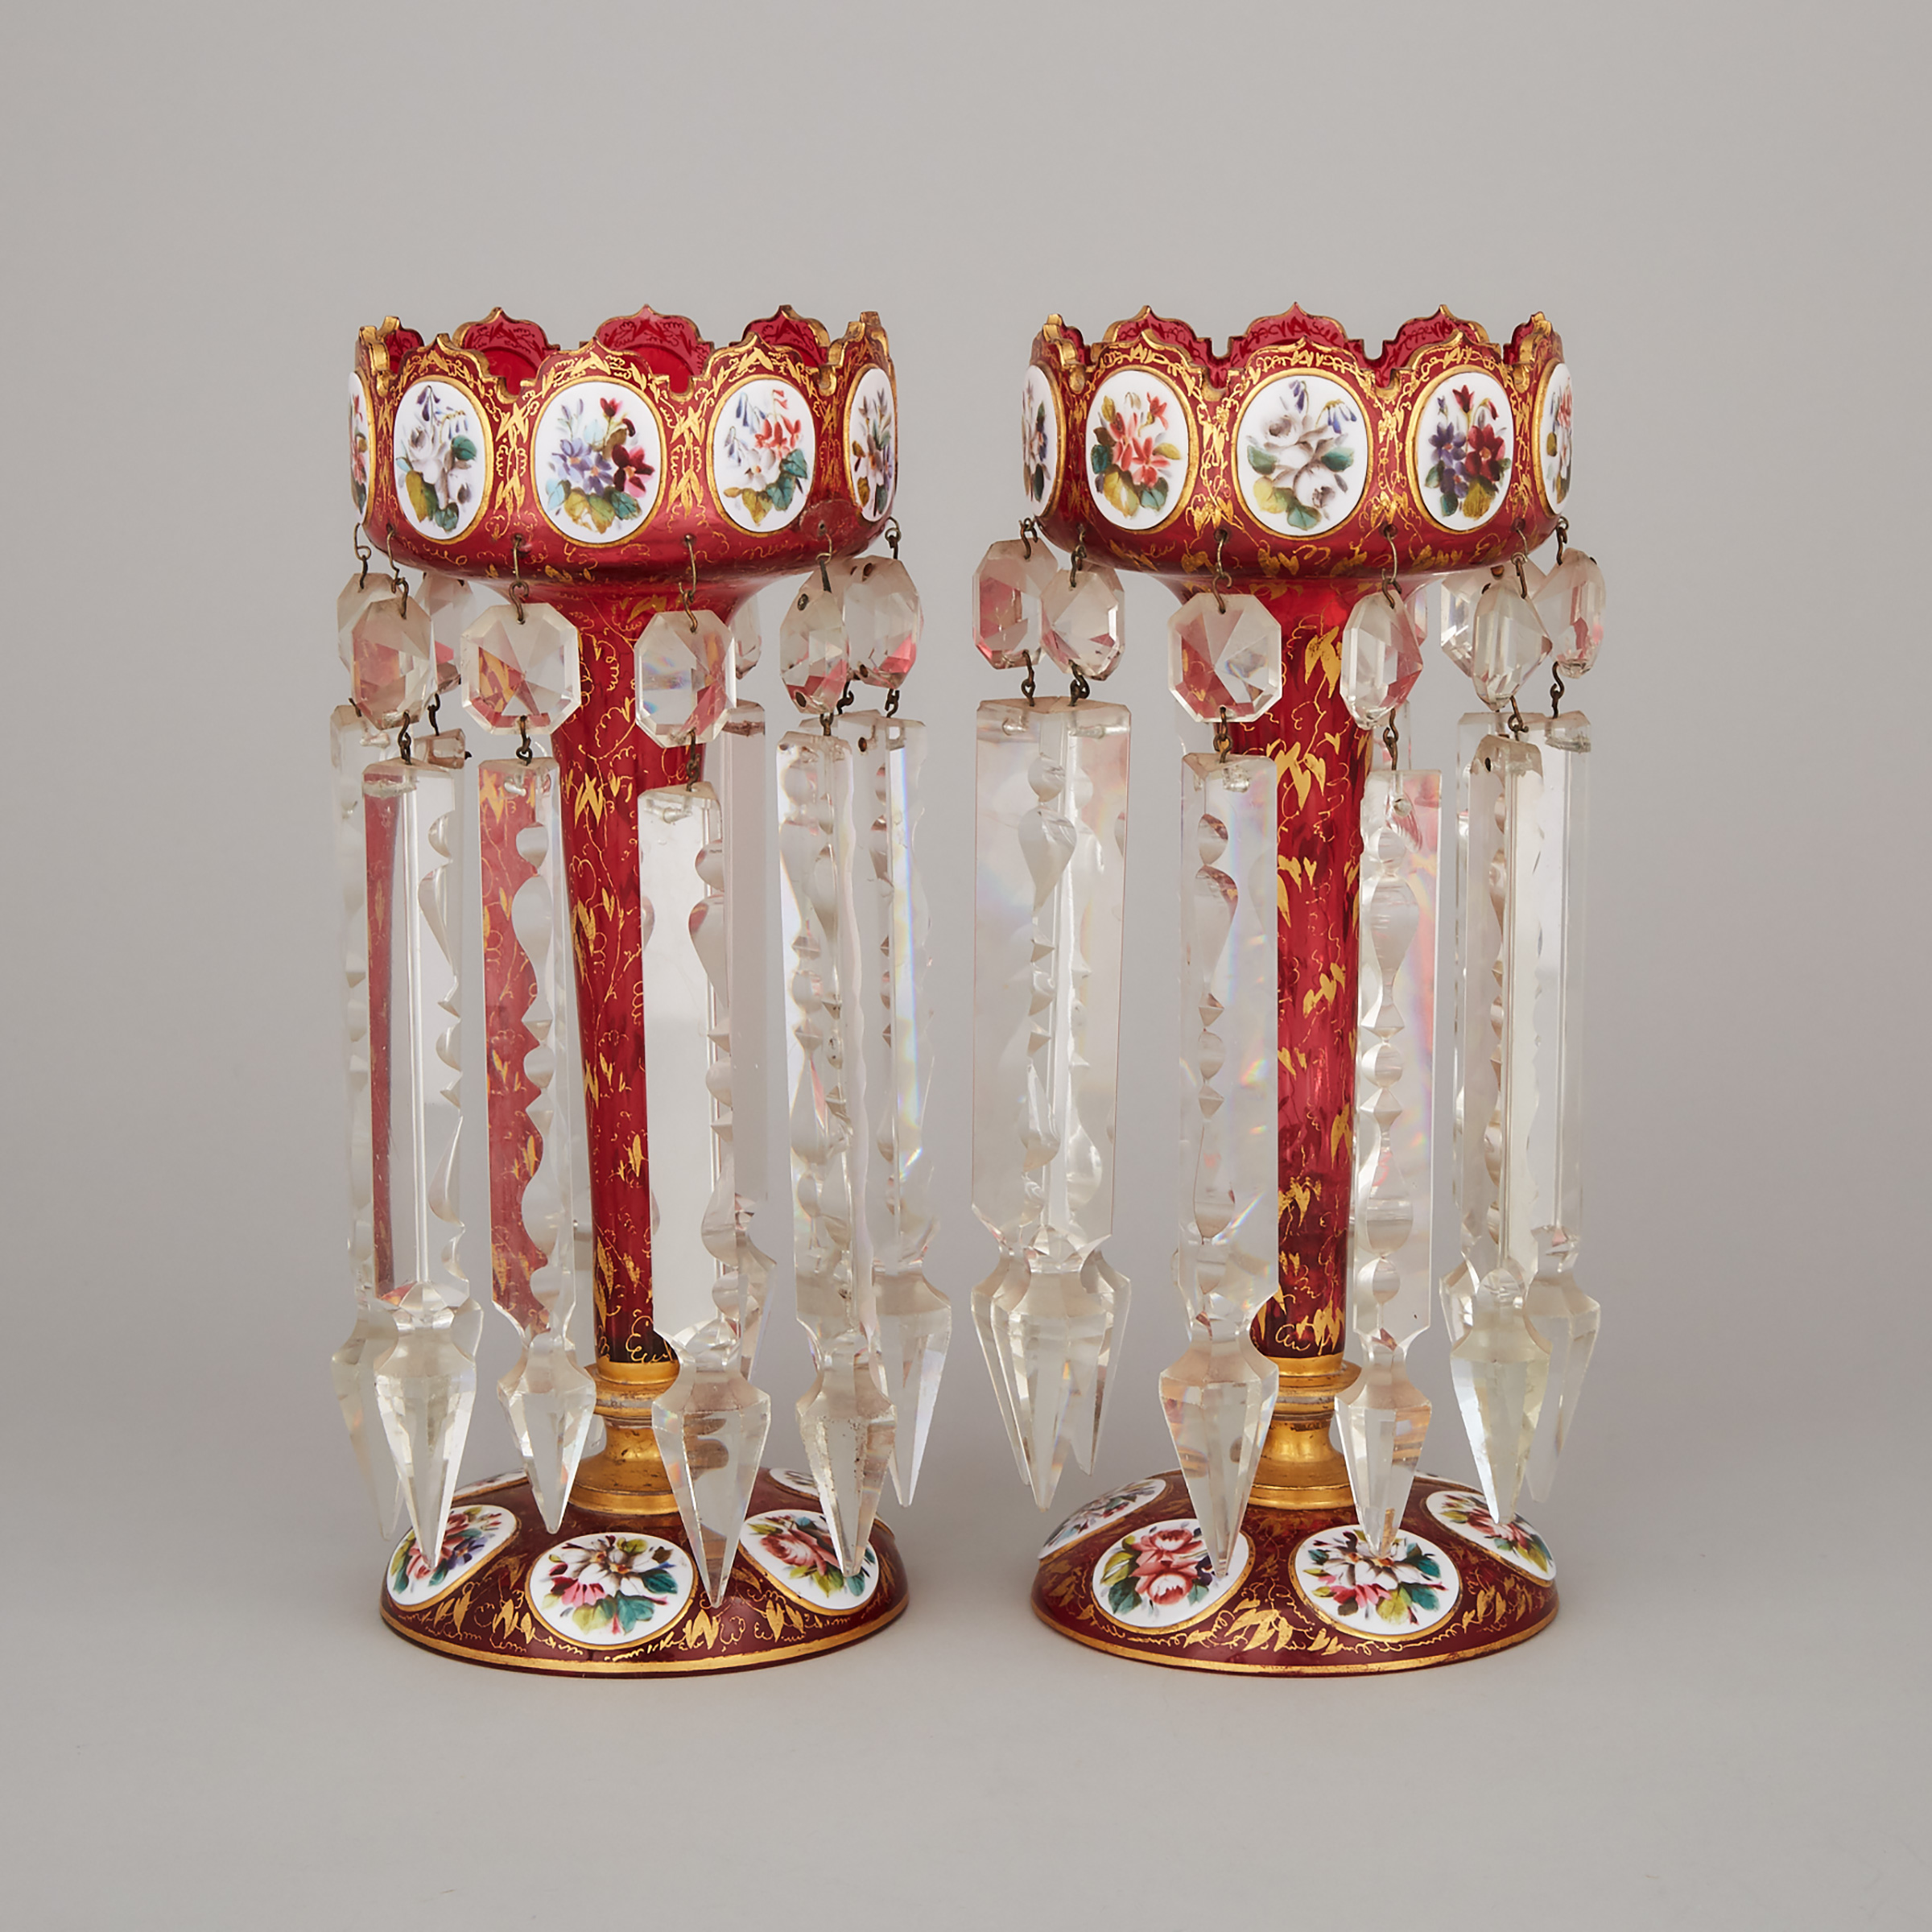 Pair of Bohemian Overlaid, Enameled and Gilt Red Glass Lustres, late 19th century